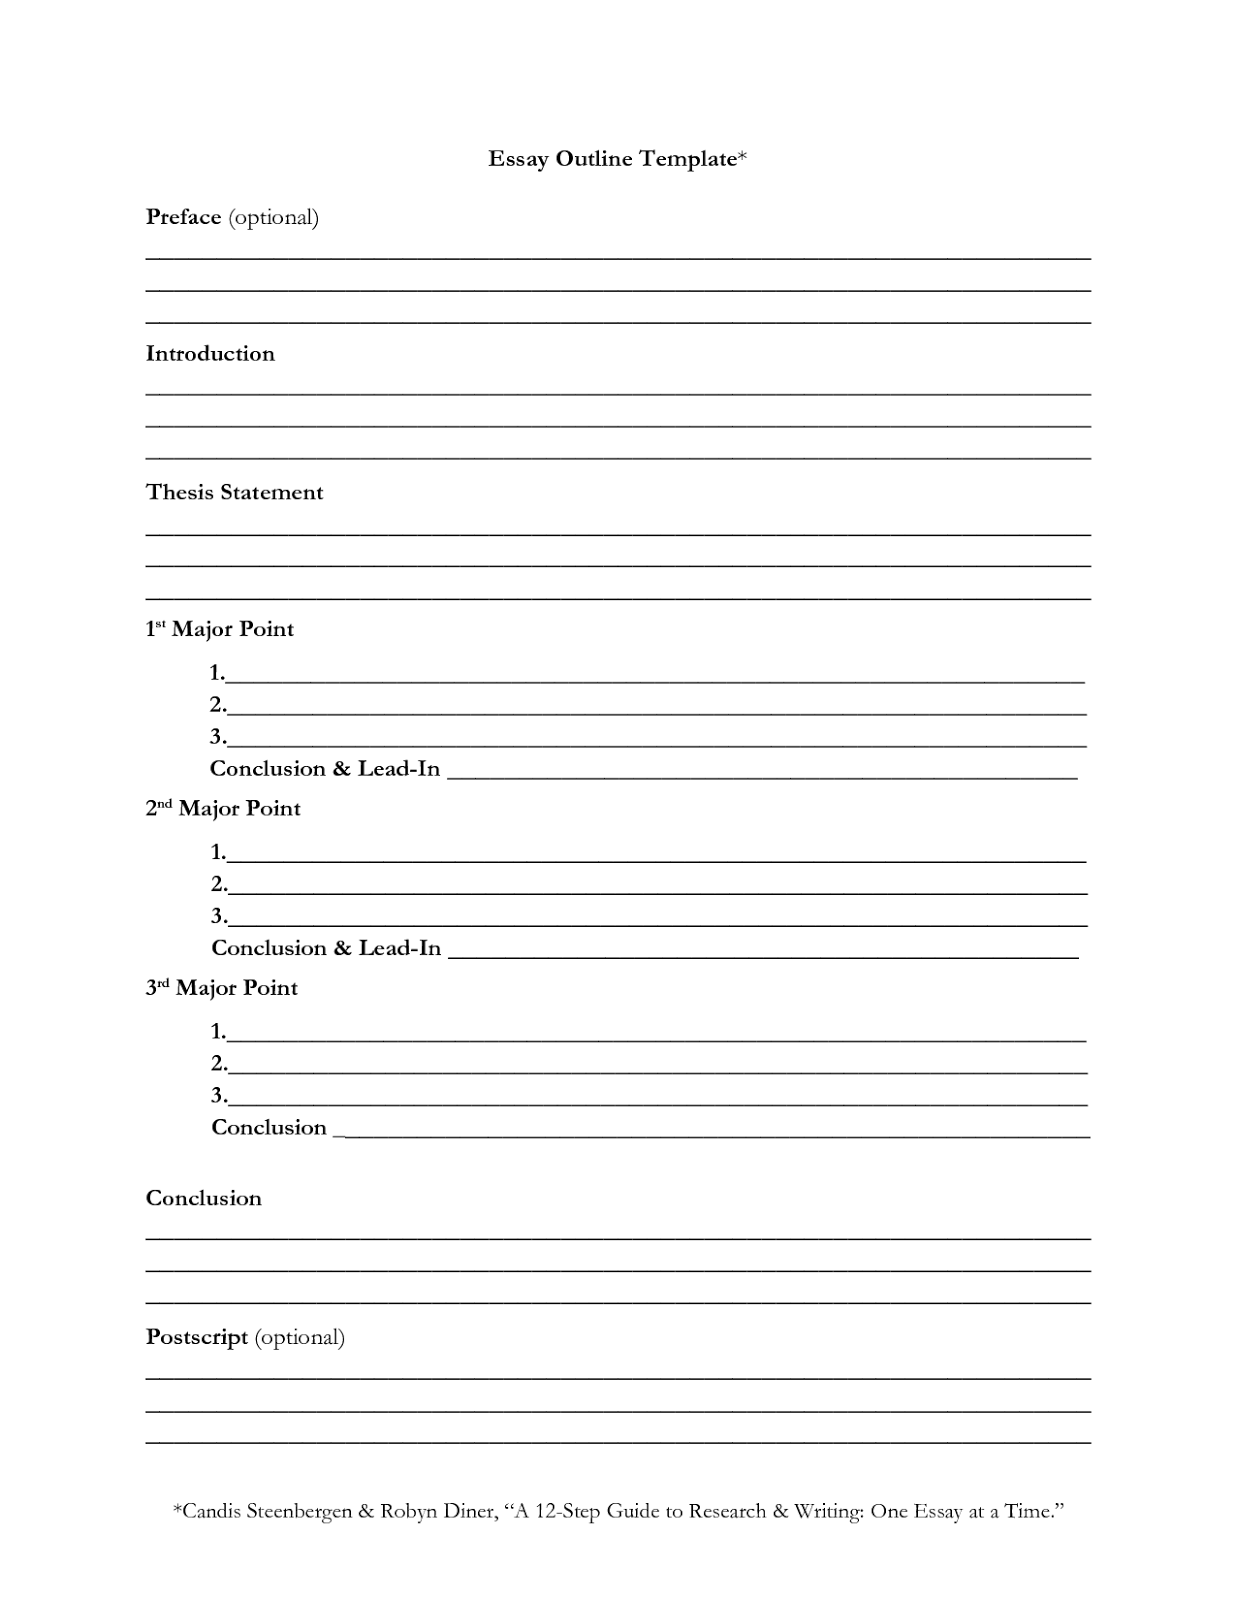 5 Free Essay Outline Templates - Word - Excel - PDF Formats